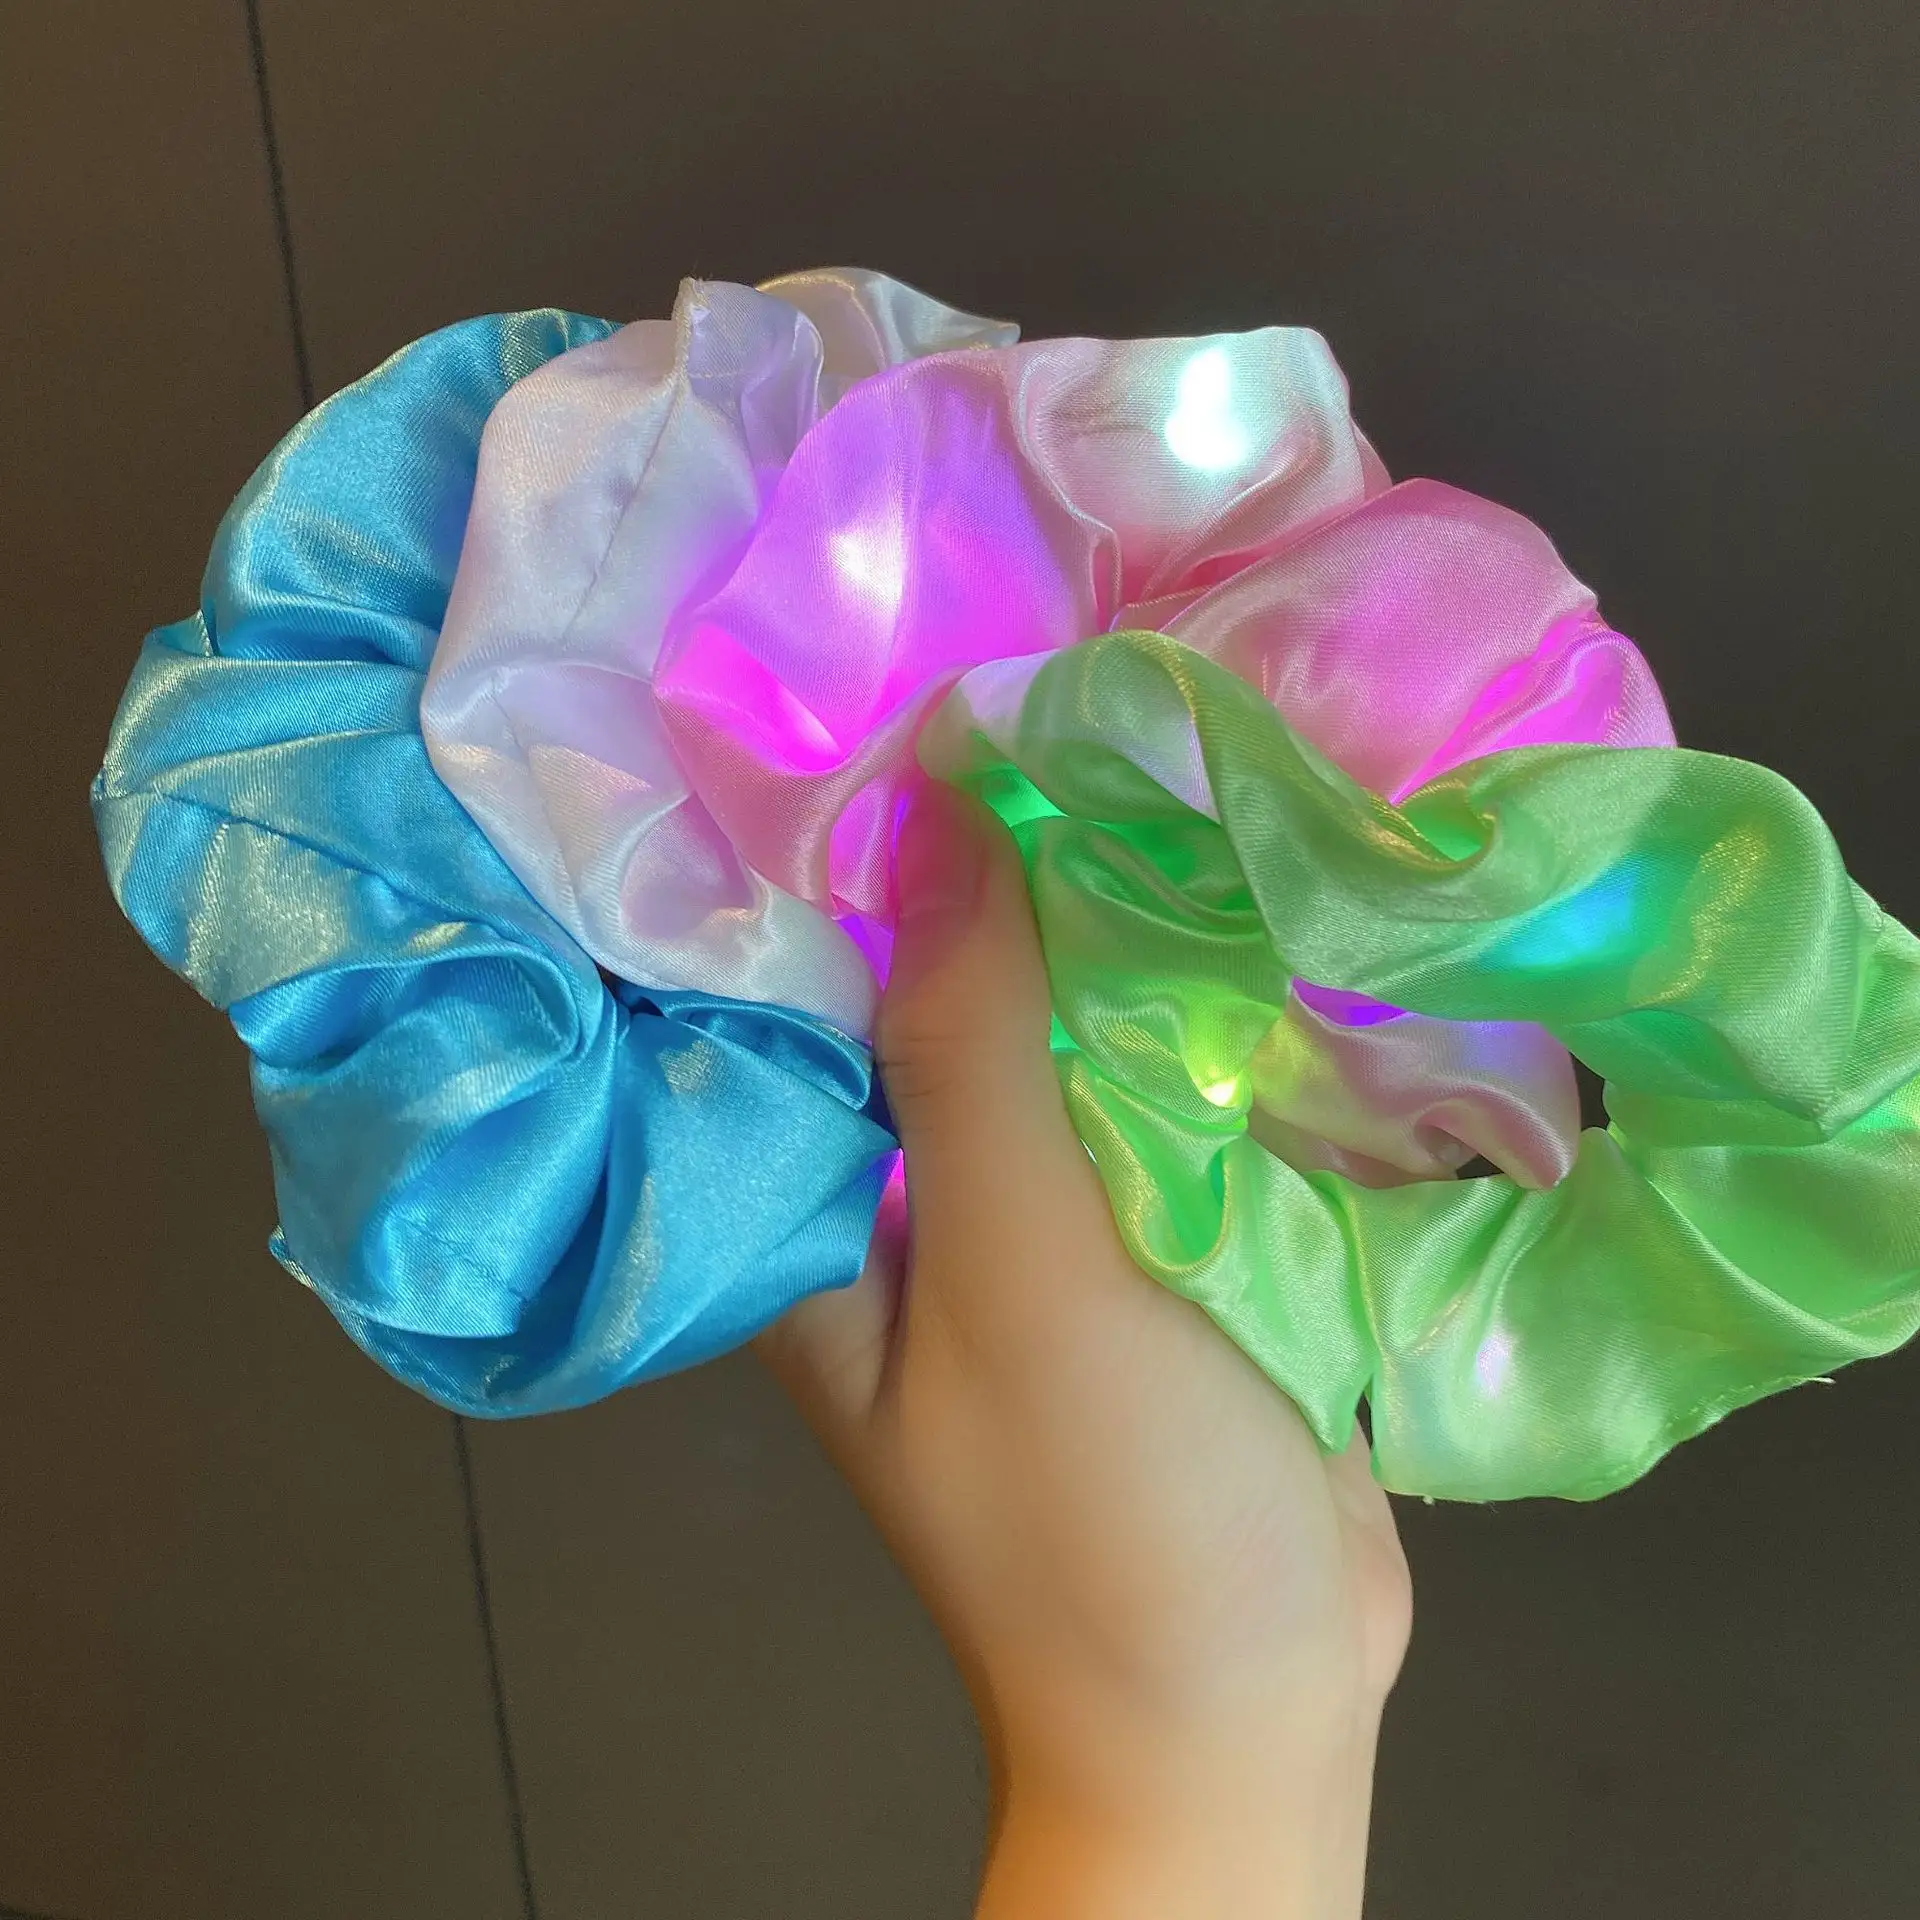 K1115 Newest Party LED Headband Light Colorful Satin Hair Holder Headwear Tie for Women Girls Elastic Ring Rope LED Scrunchies